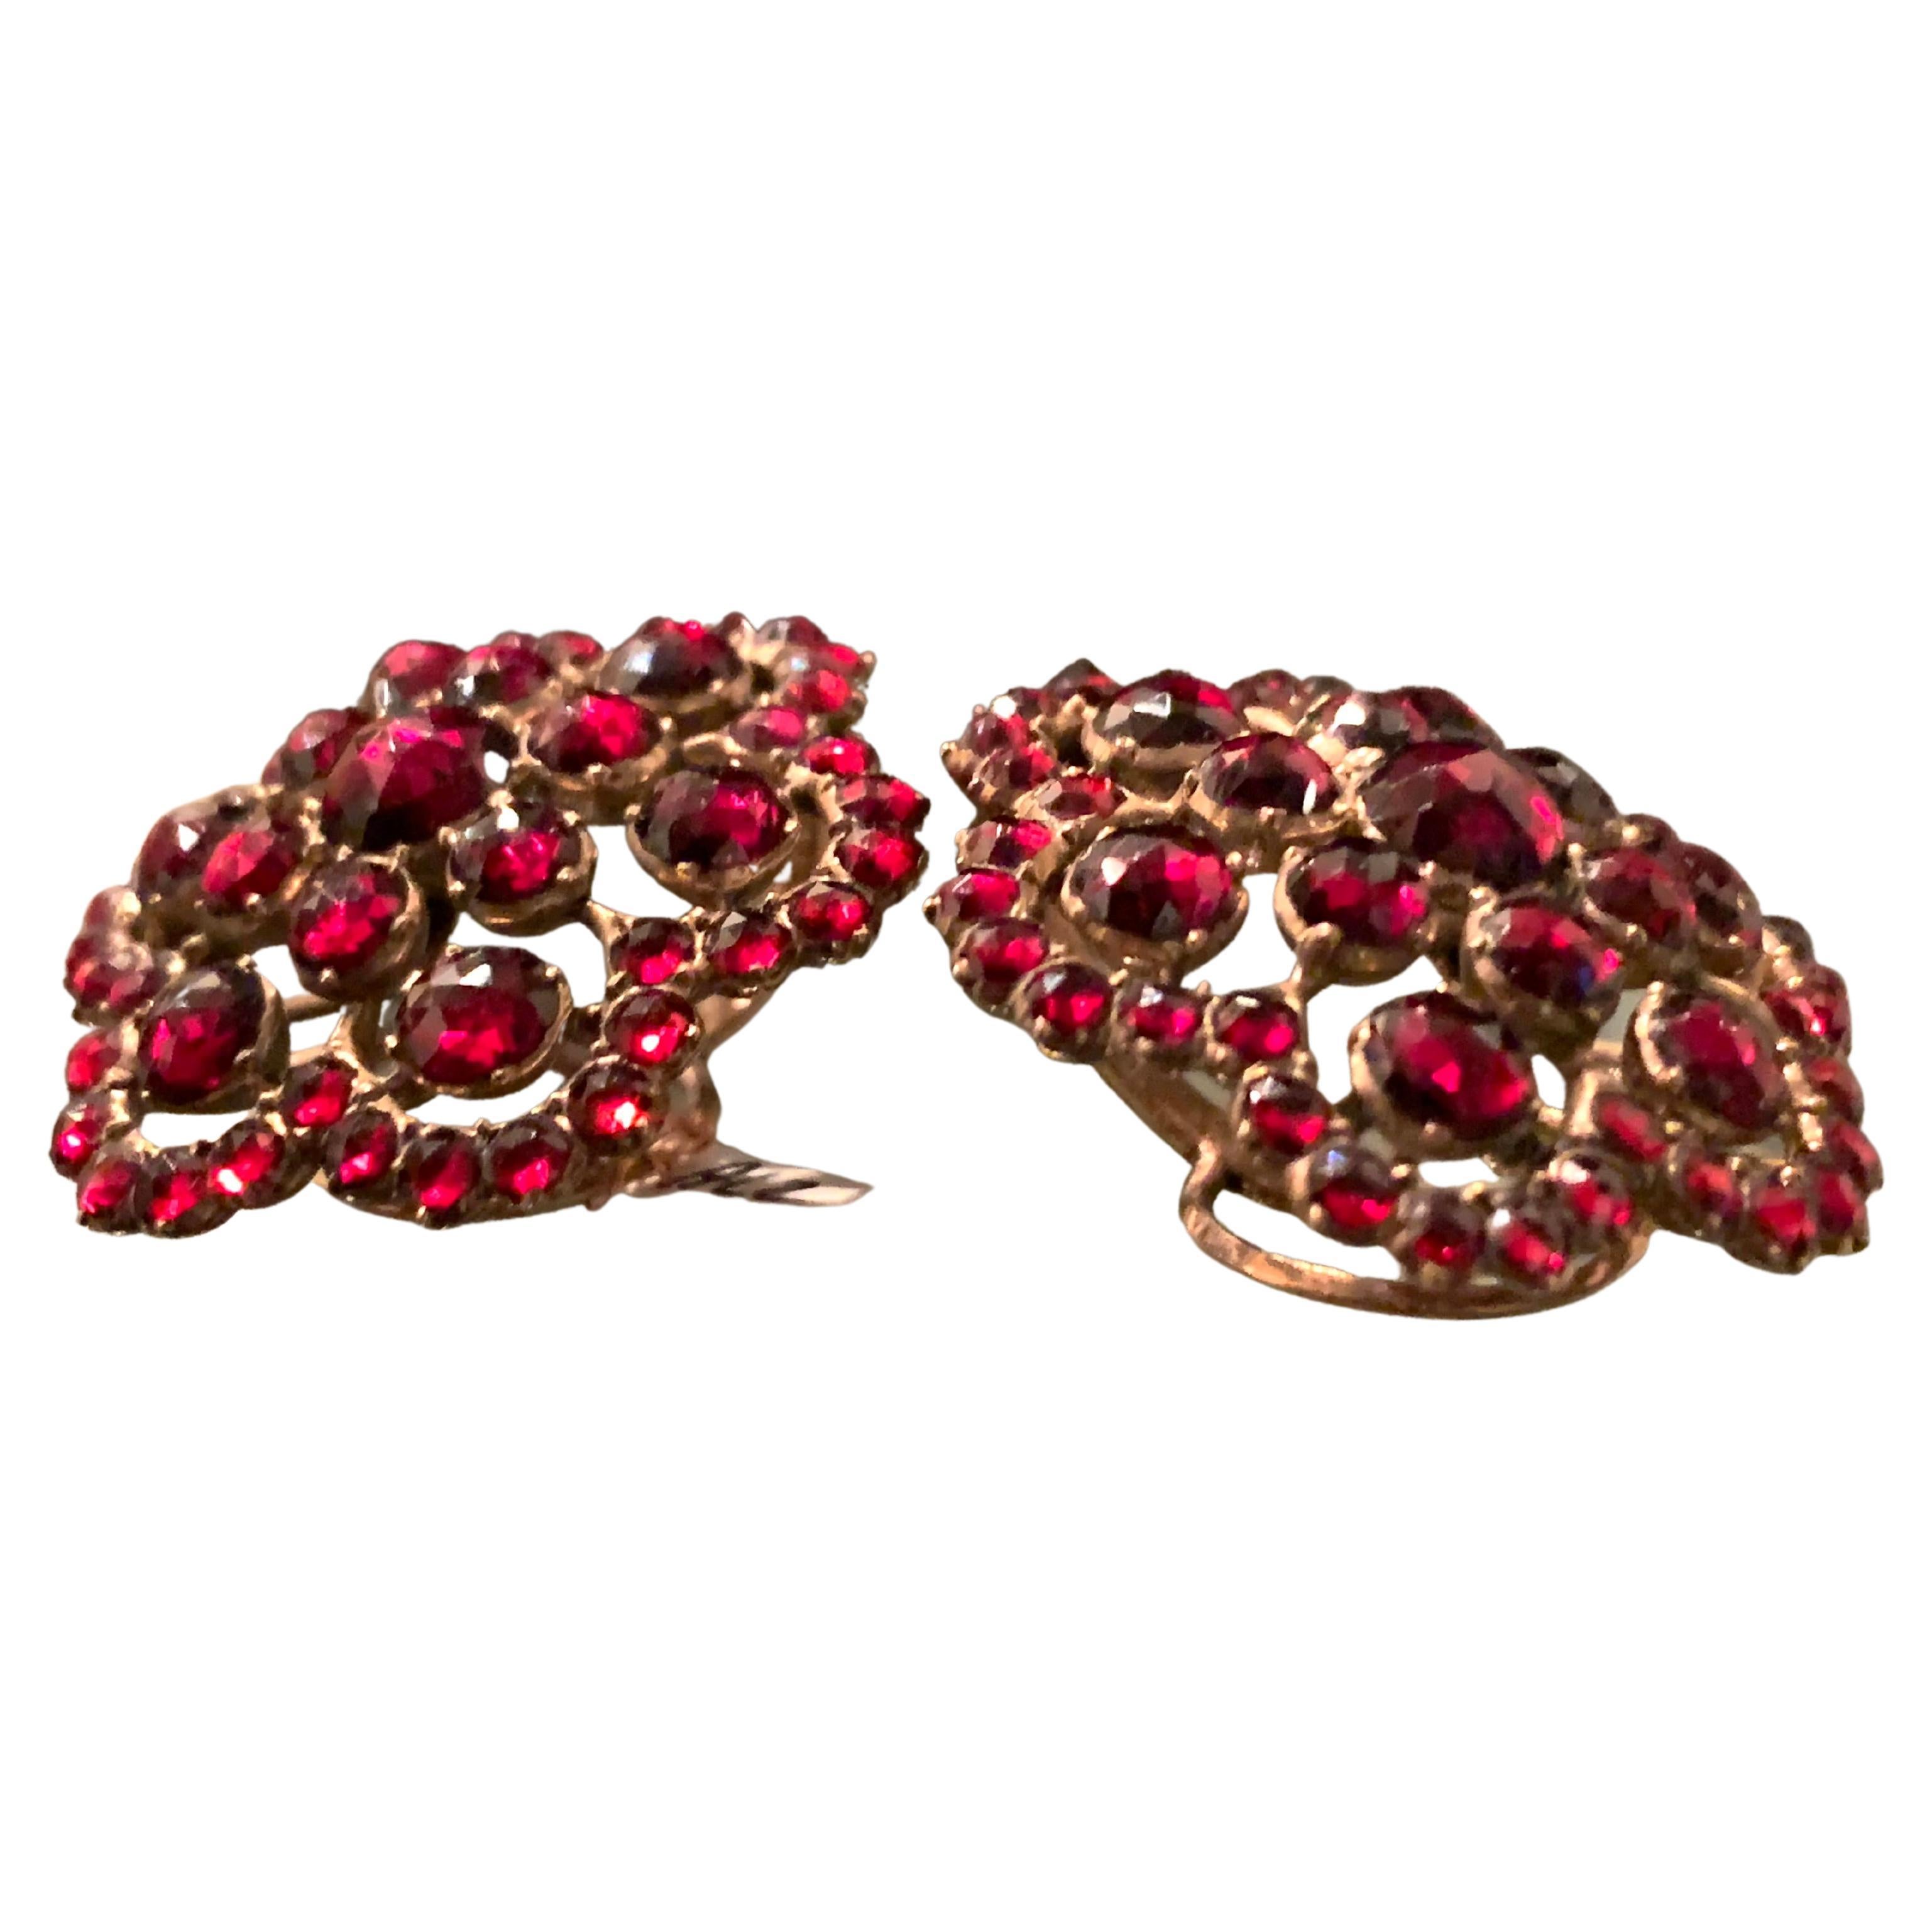 it is very rare indeed to find earrings from the Rokoko period.
This pair of garnet rosettes has kept it's period fitting and is in wonderful condition considering it's age.